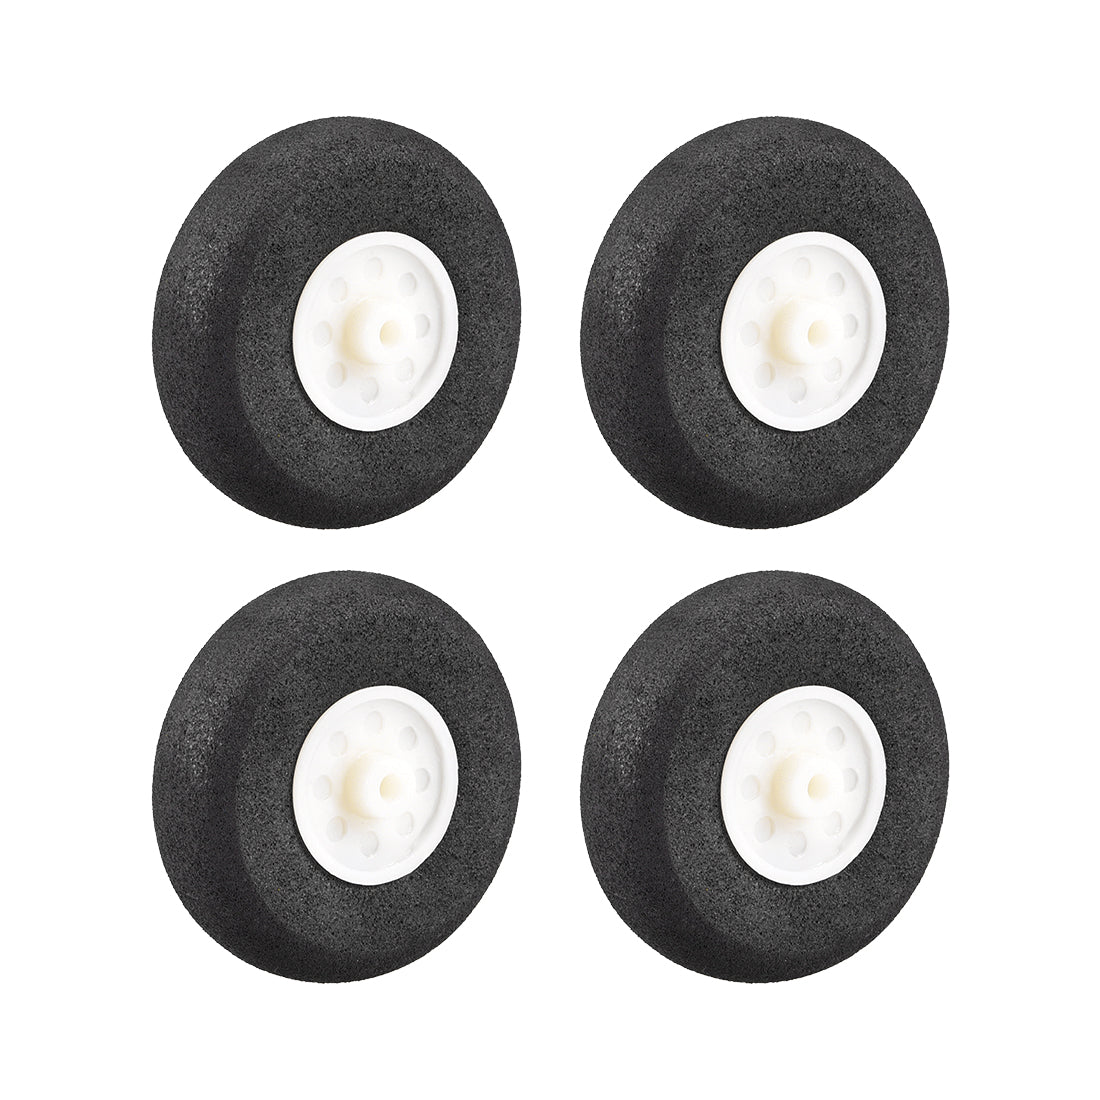 uxcell Uxcell RC Airplane Wheels - 4PCS RC Airplane Aircraft Sponge Wheels 1.77 inch x 0.1 inch